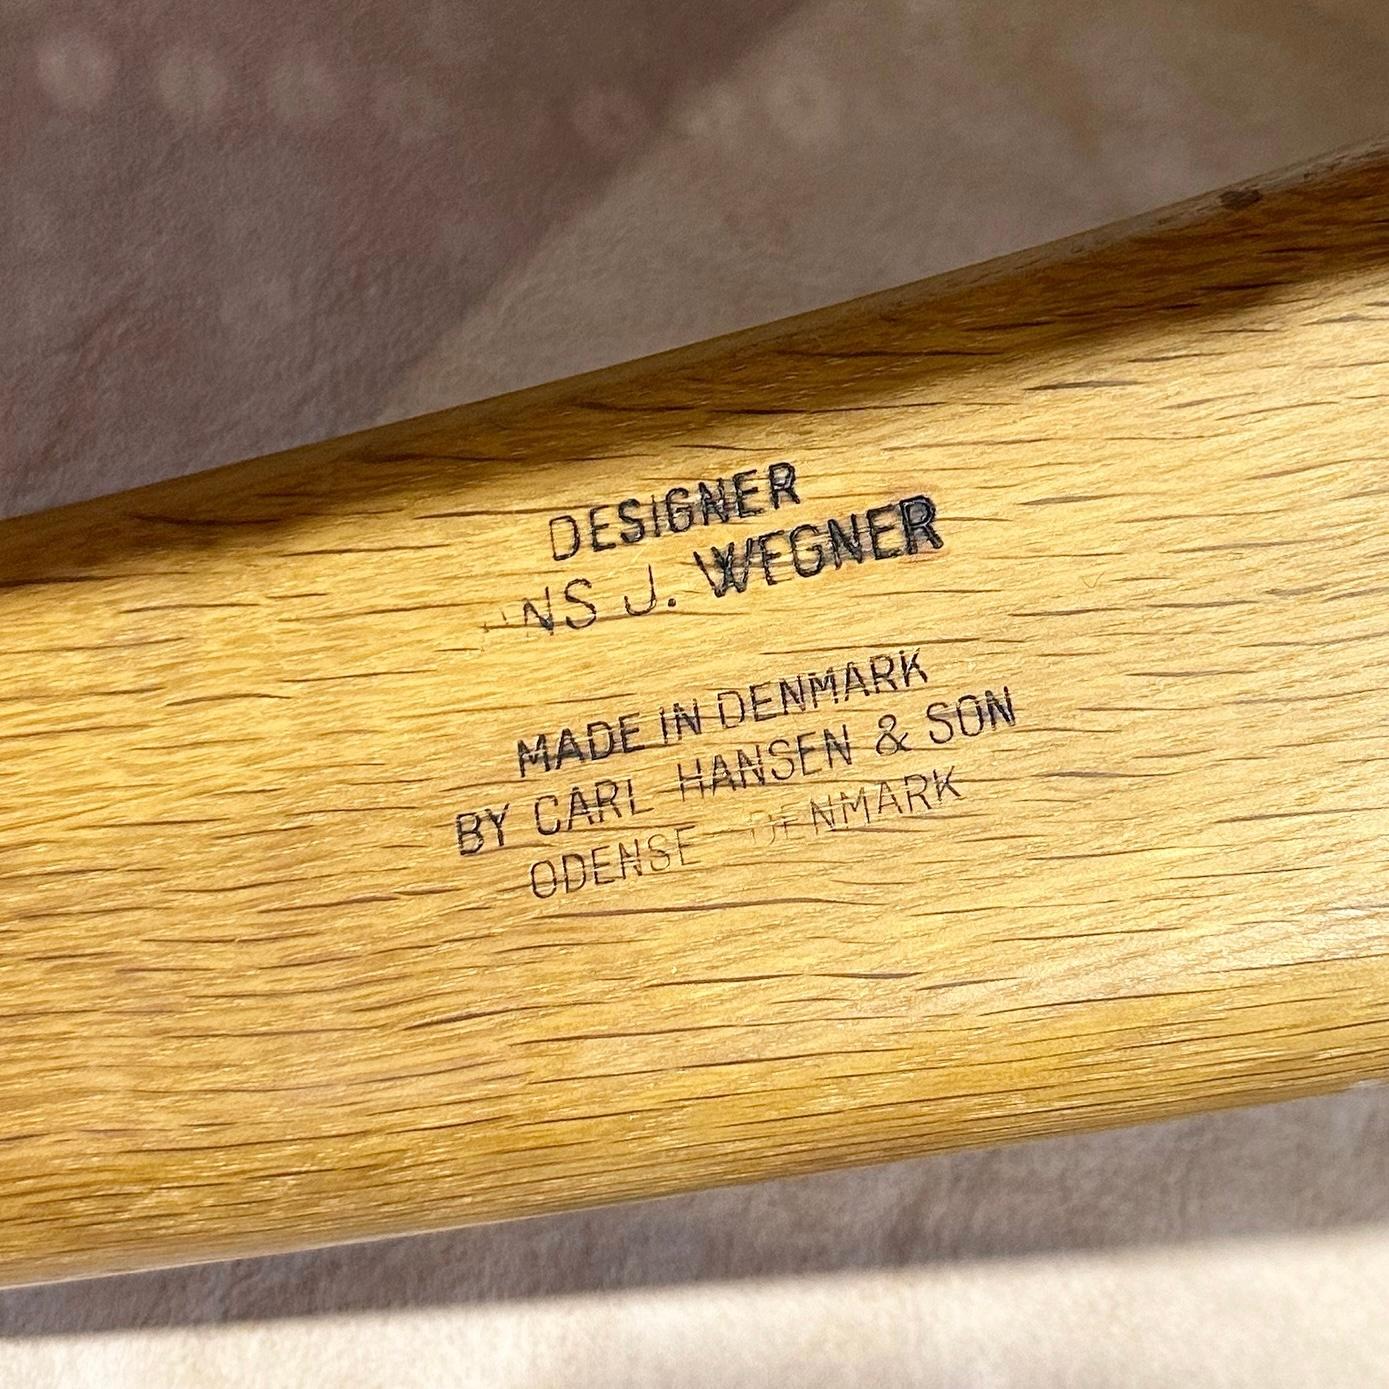 Love a Danish cord chair. These are quintessential Wegner pieces. Lots of copies out there, but these are the real deal. We added a pair of tan California sheepskins for a cozy seat.

Branded manufacturer's mark to underside of one example ‘Made in